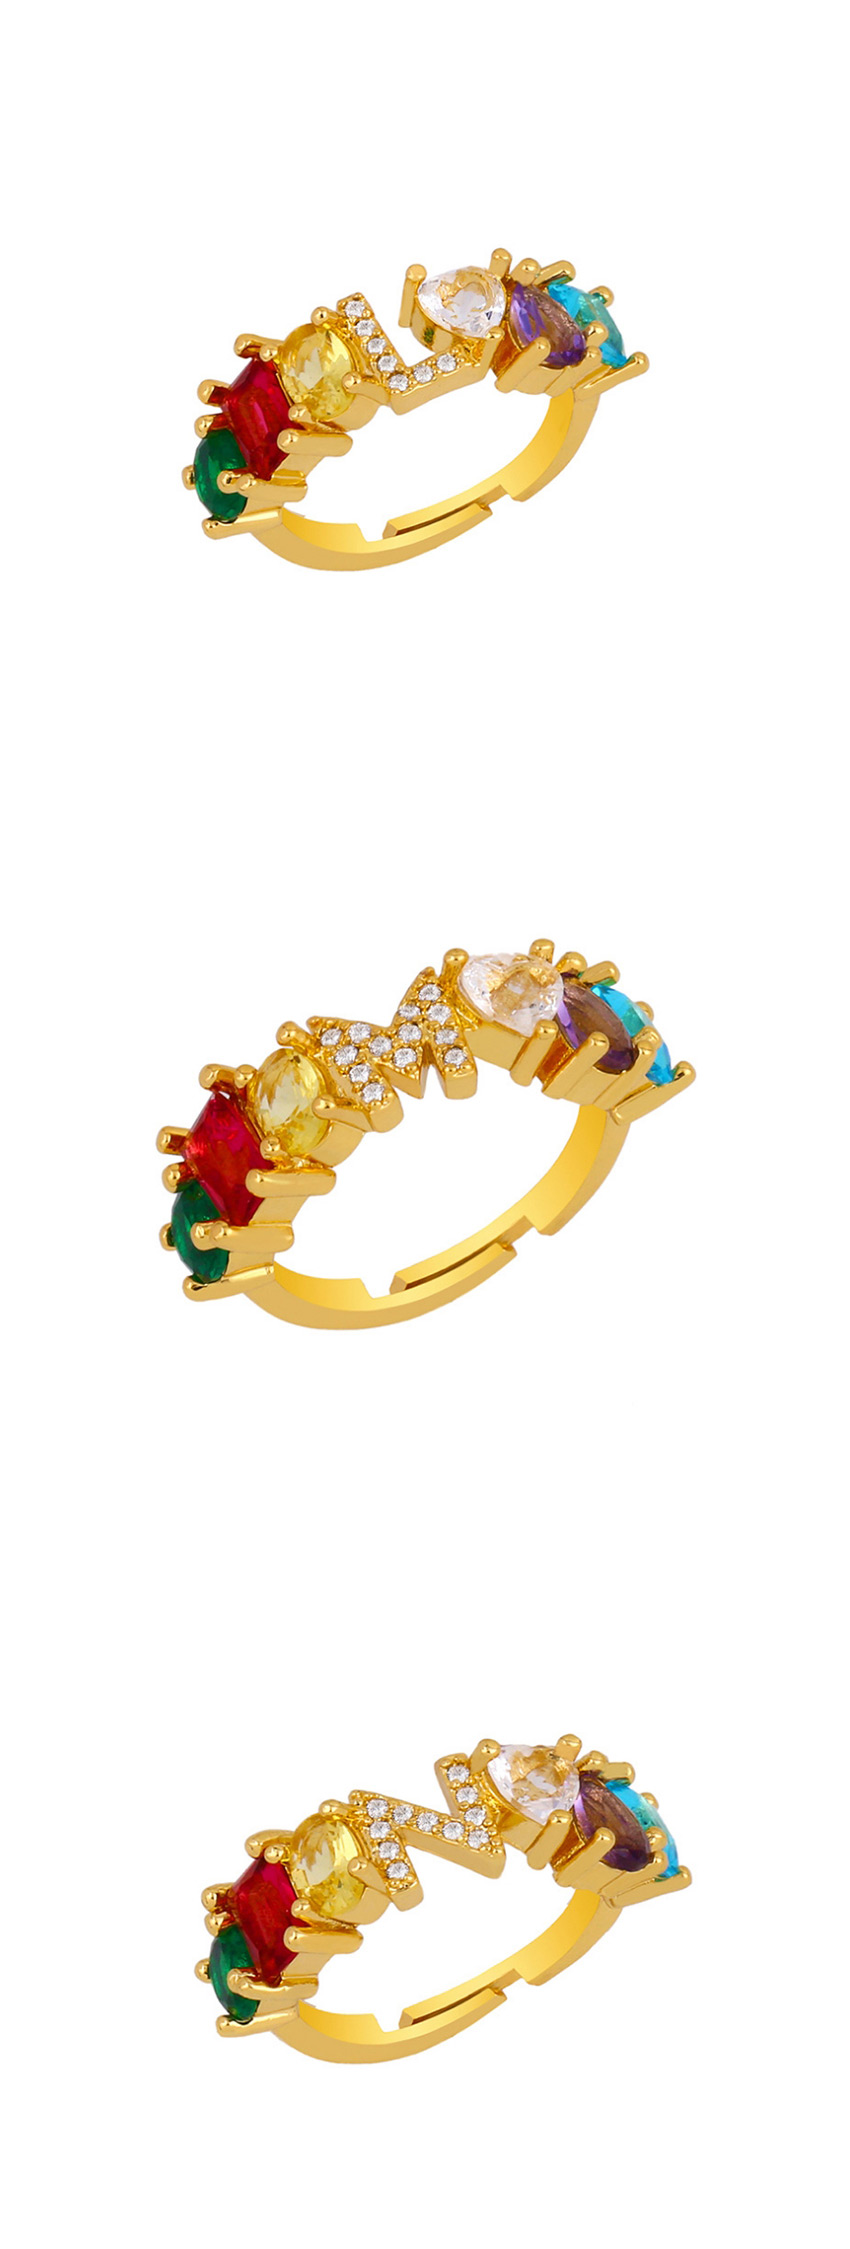 Fashion T Gold Heart-shaped Adjustable Ring With Colorful Diamond Letters,Rings